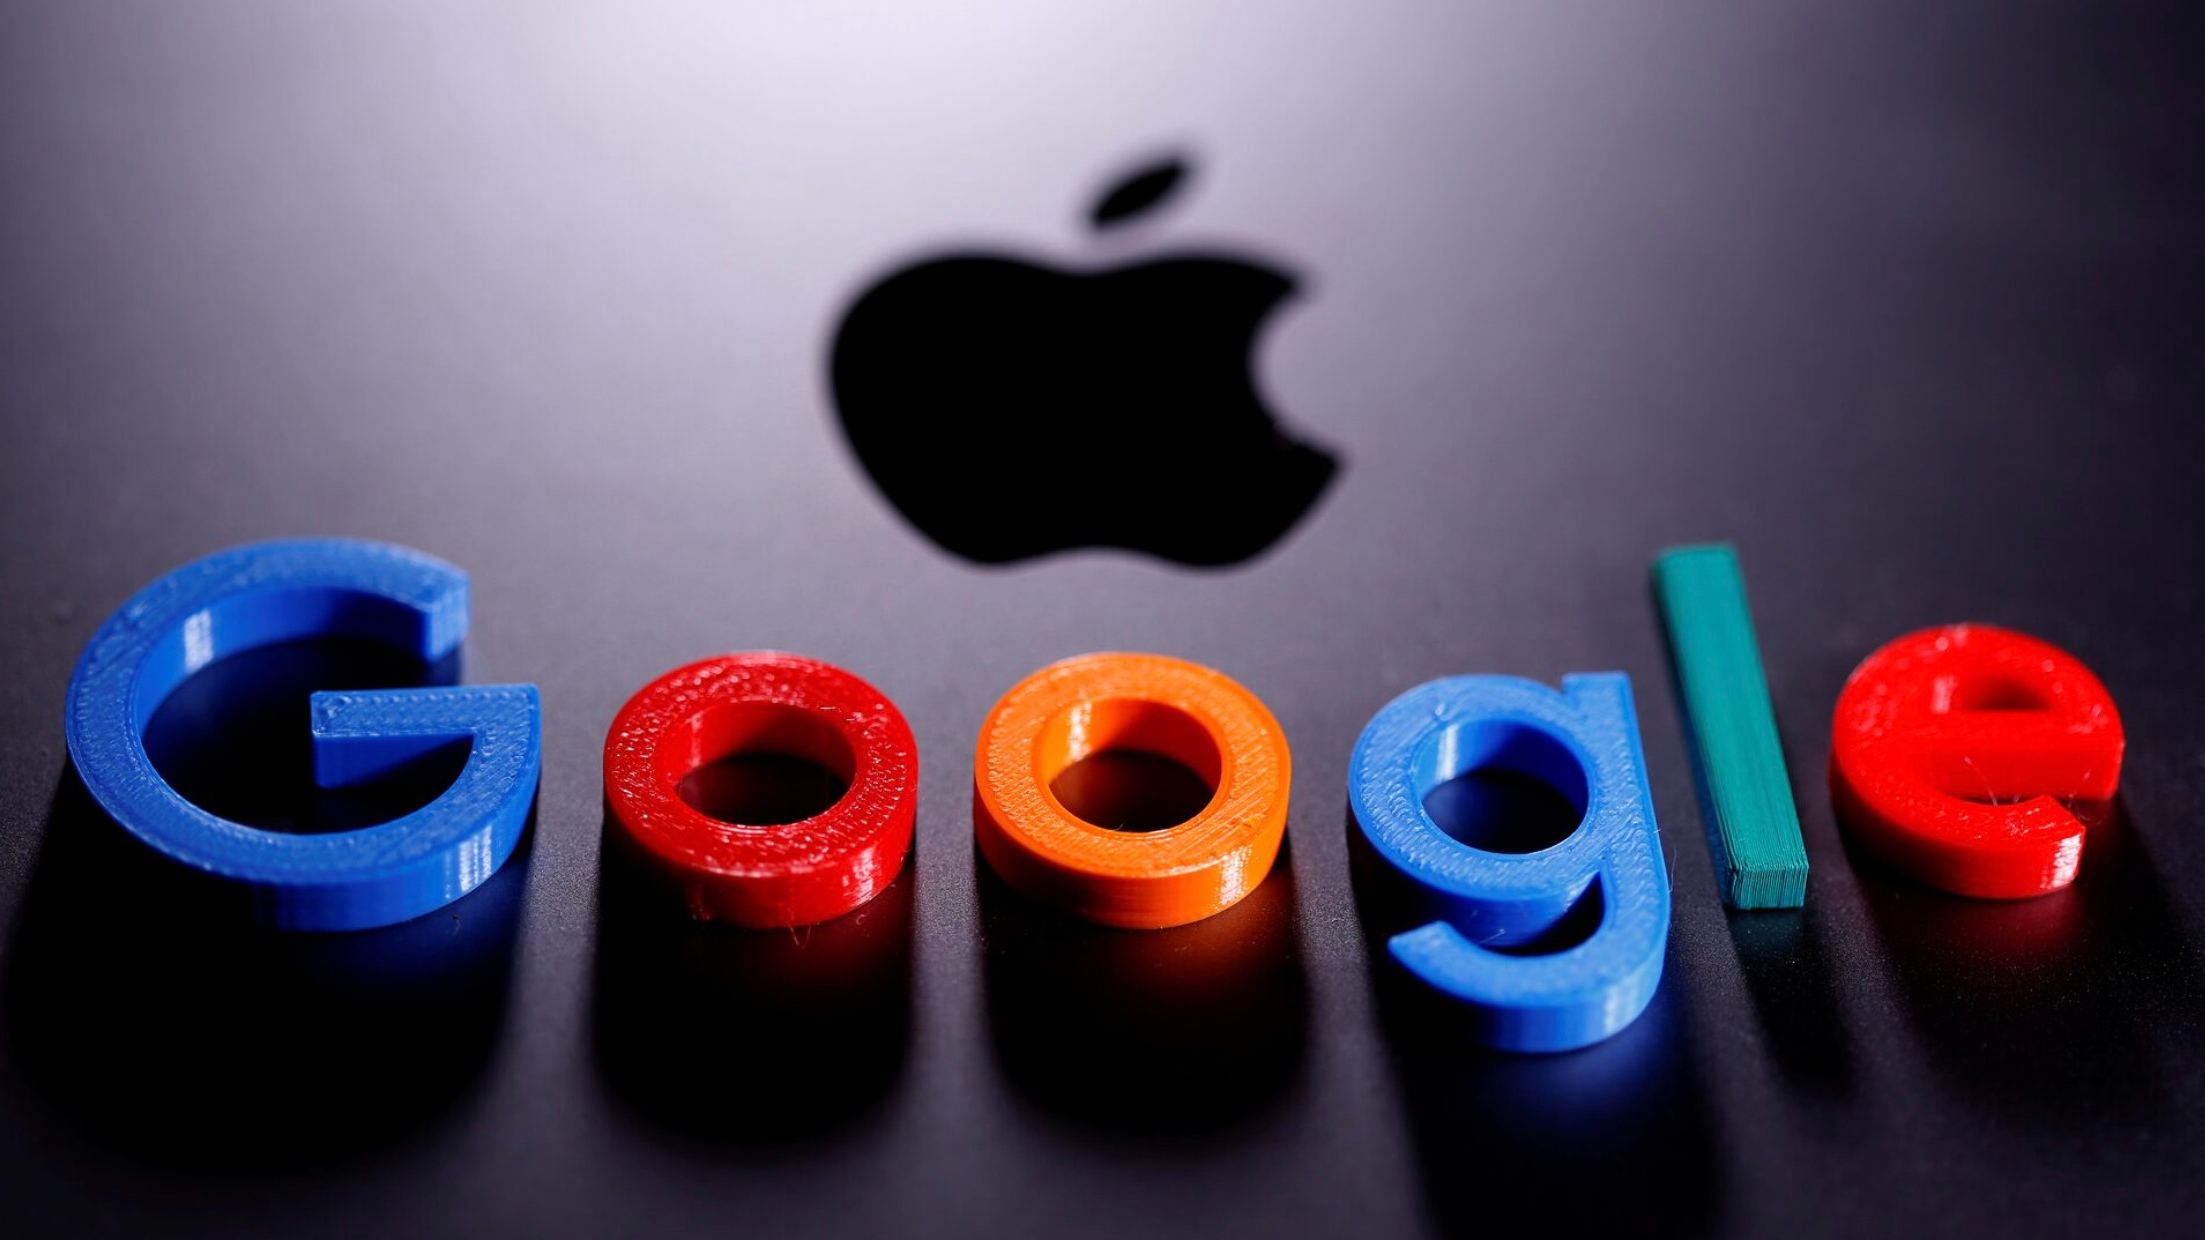 An illustration shows a 3D printed Google logo placed on the Apple Macbook. /Reuters